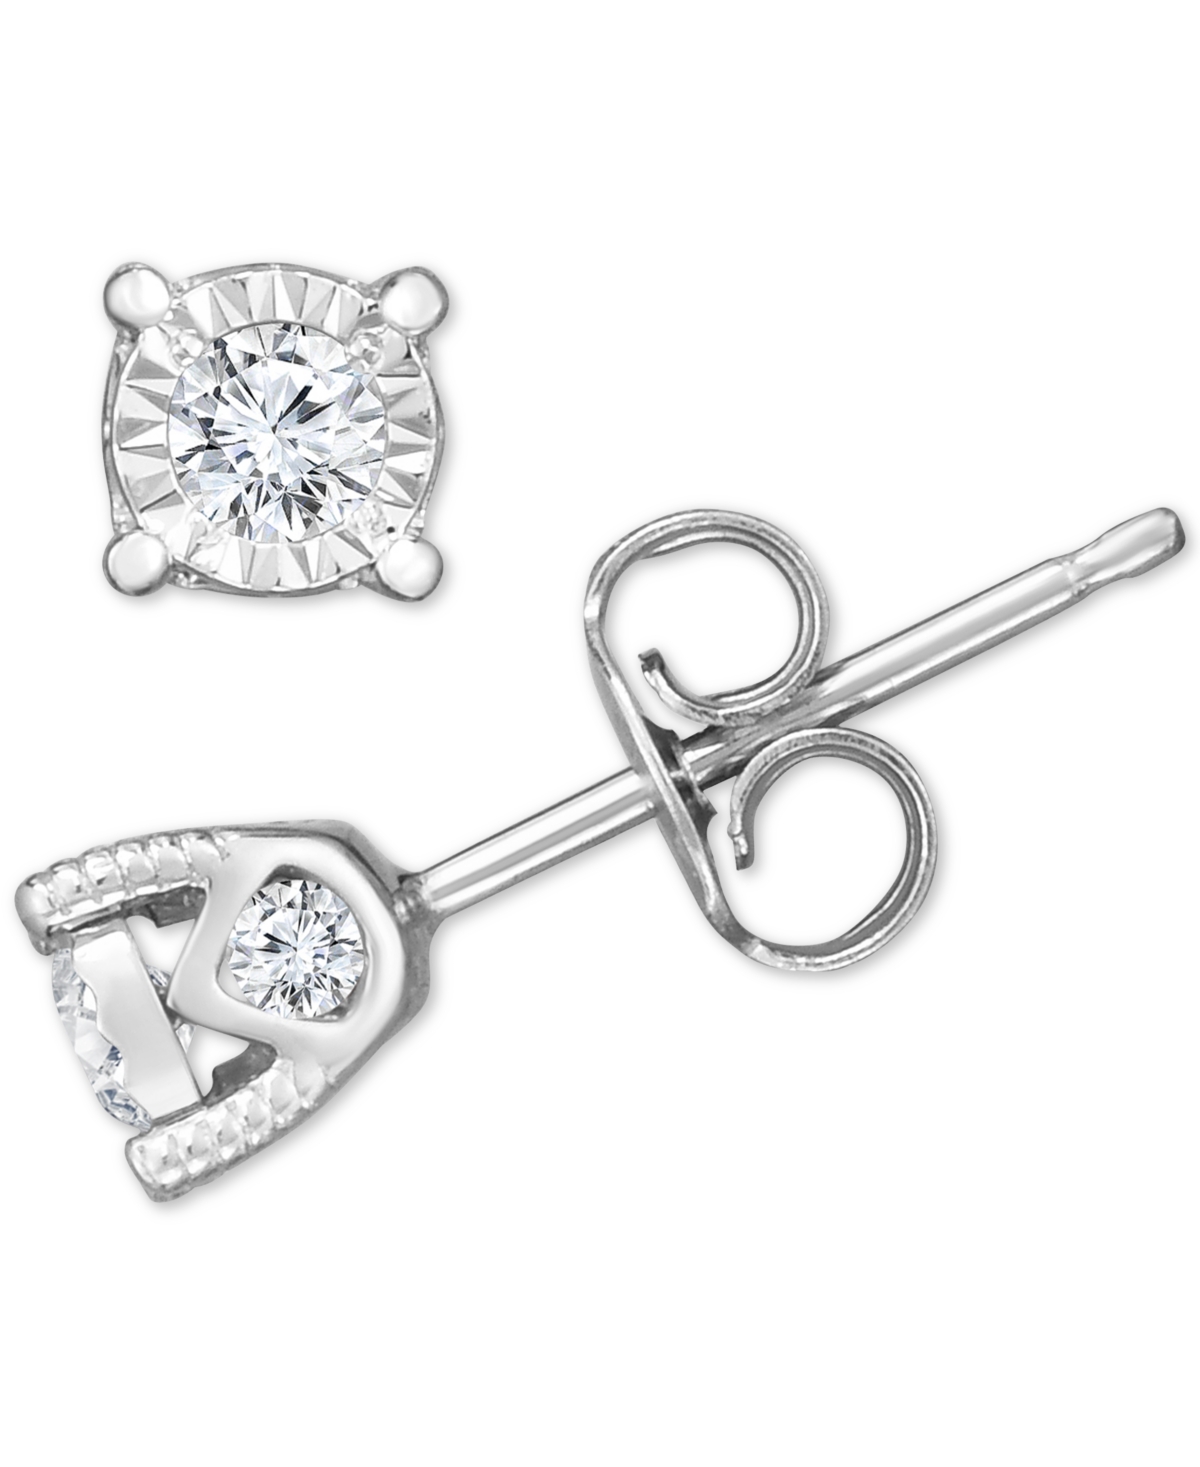 Diamond Stud Earrings (3/8 ct. t.w.) in 14k White, Yellow, or Rose Gold - Rose Gold